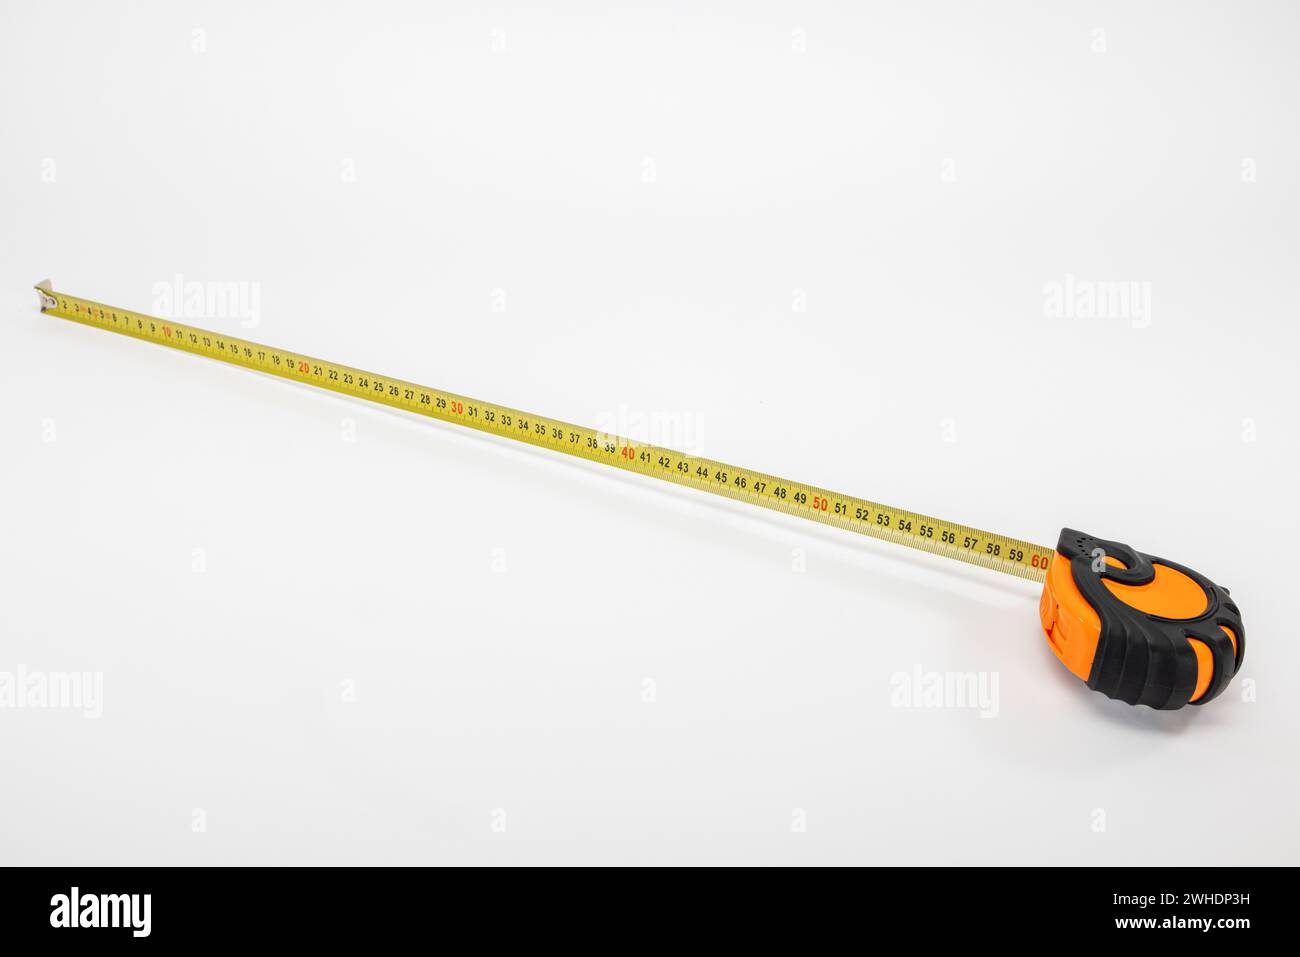 Yellow measuring tape with millimeter and centimeter graduations, measuring tool, white background, Stock Photo